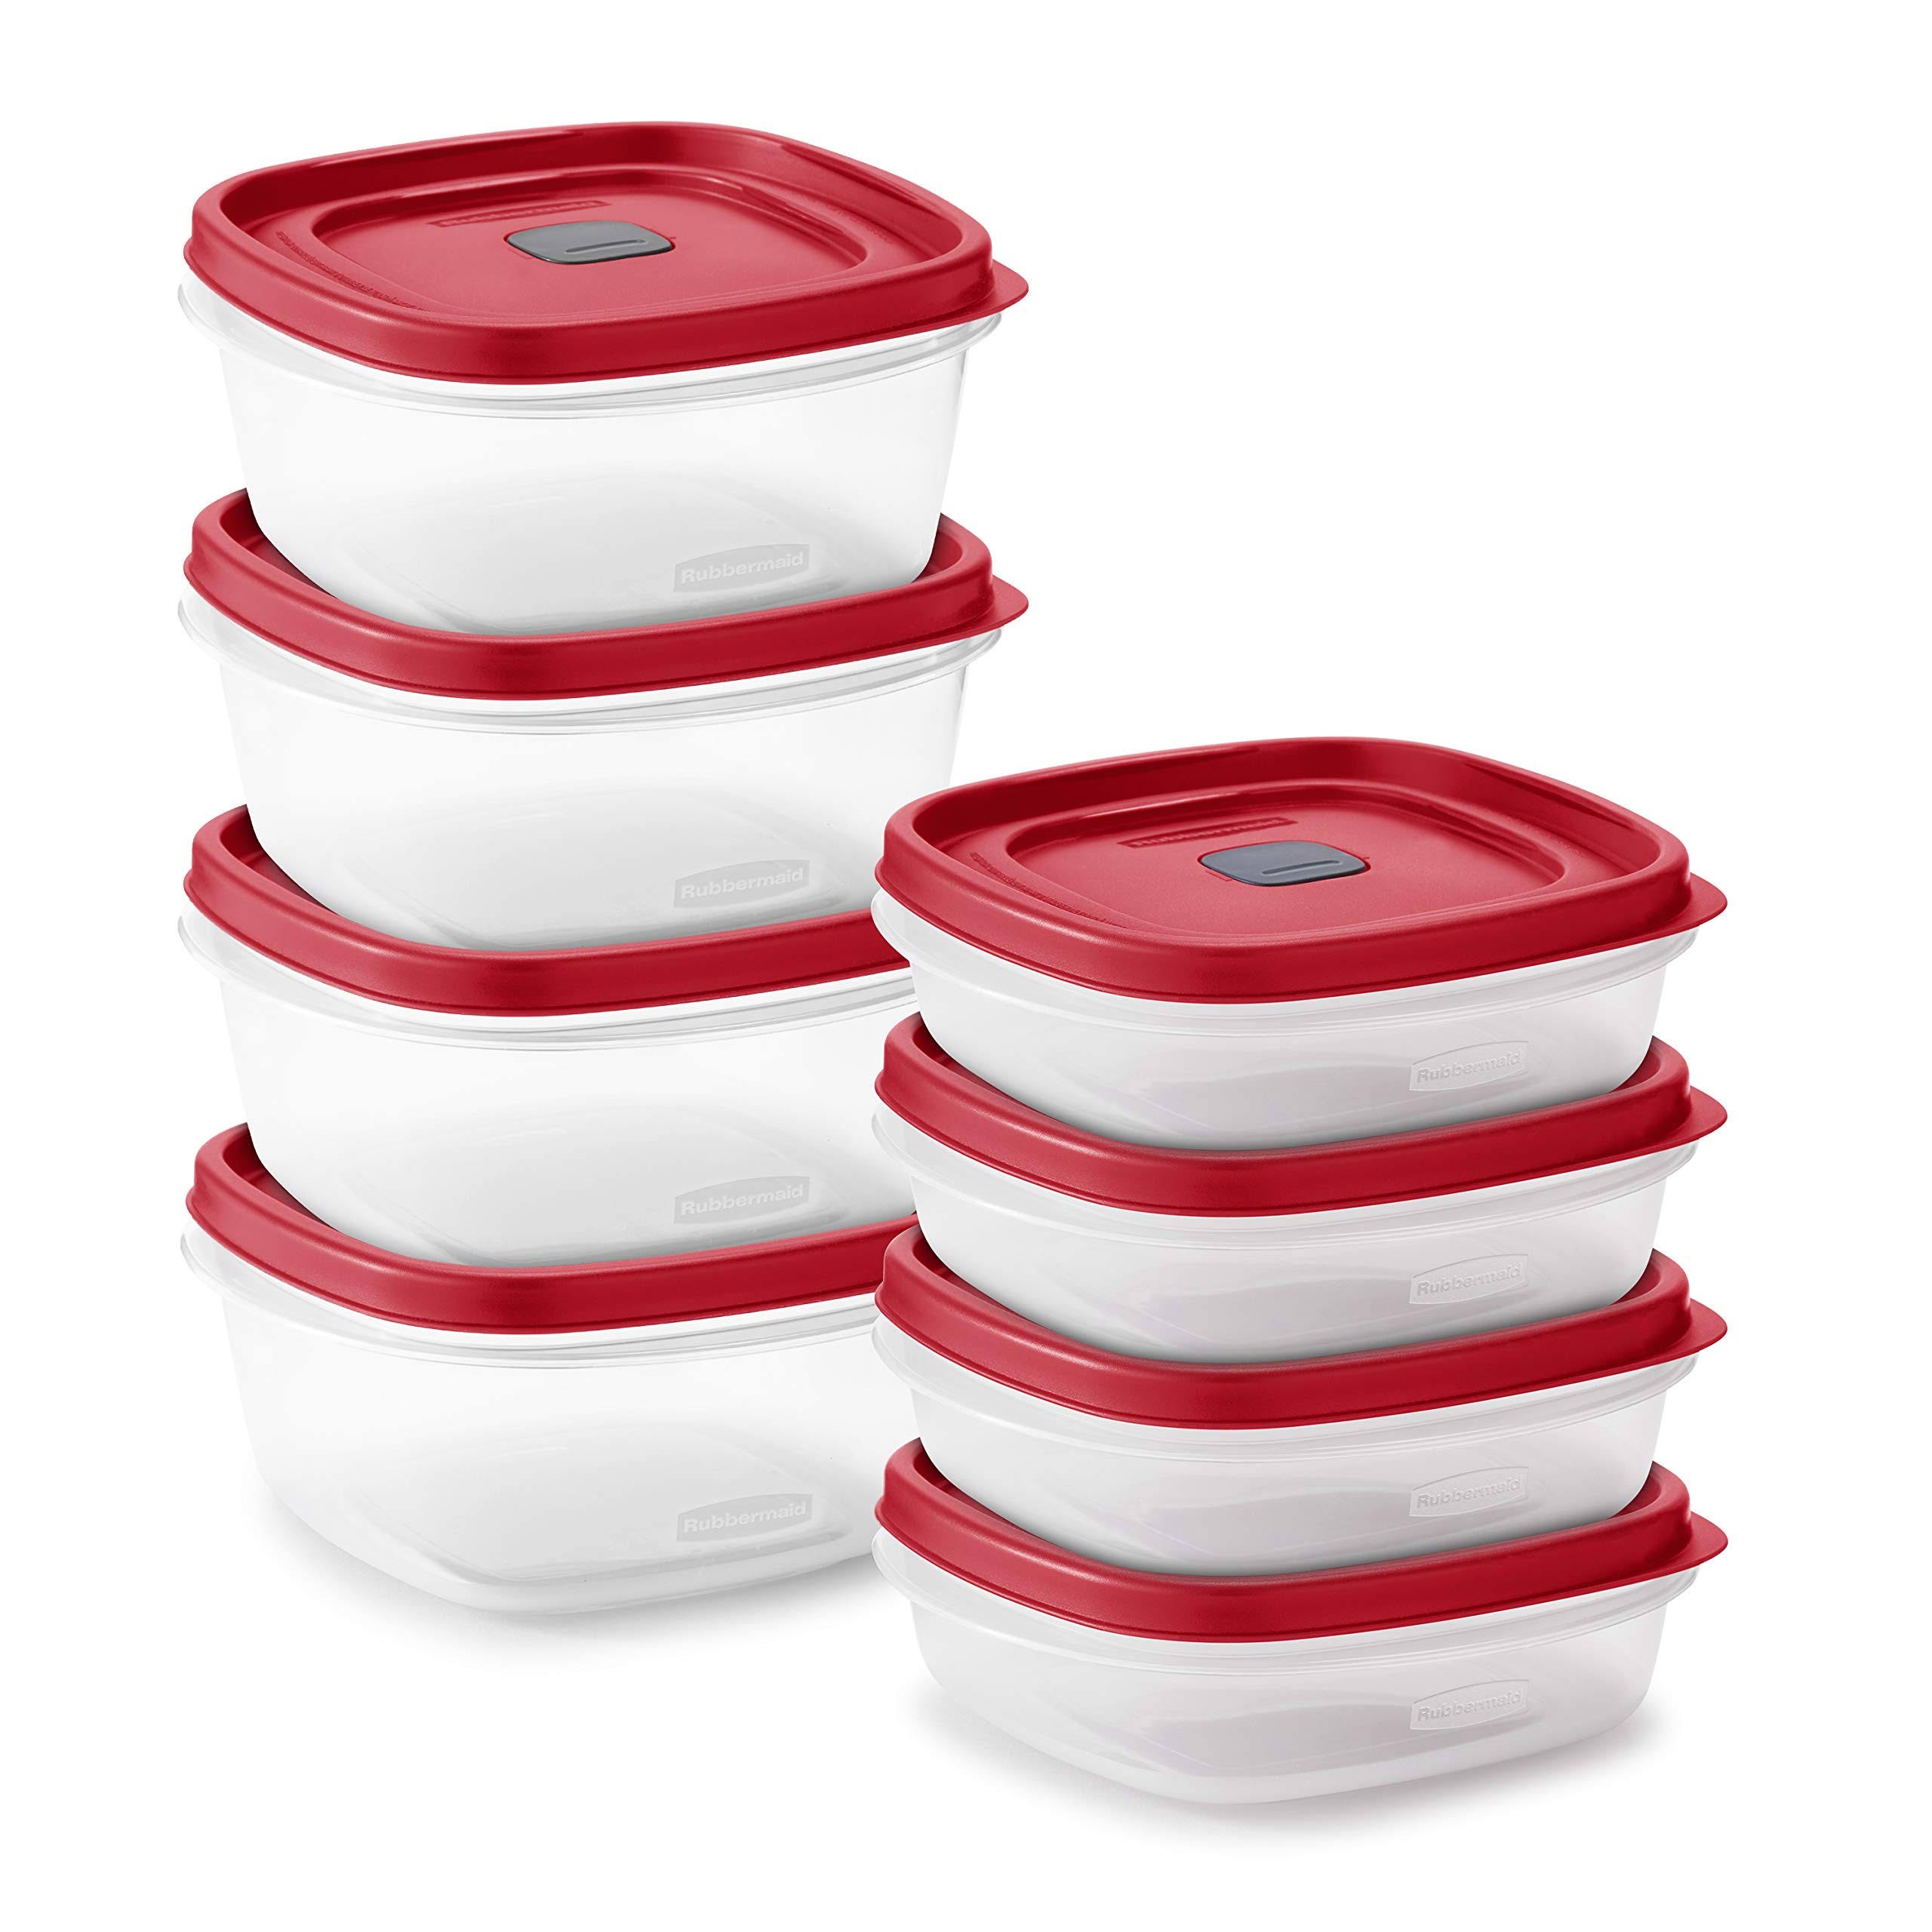 Rubbermaid Easy Find Vented Lids Food Storage Set - Durable and Organized Meal Prep Containers | Image